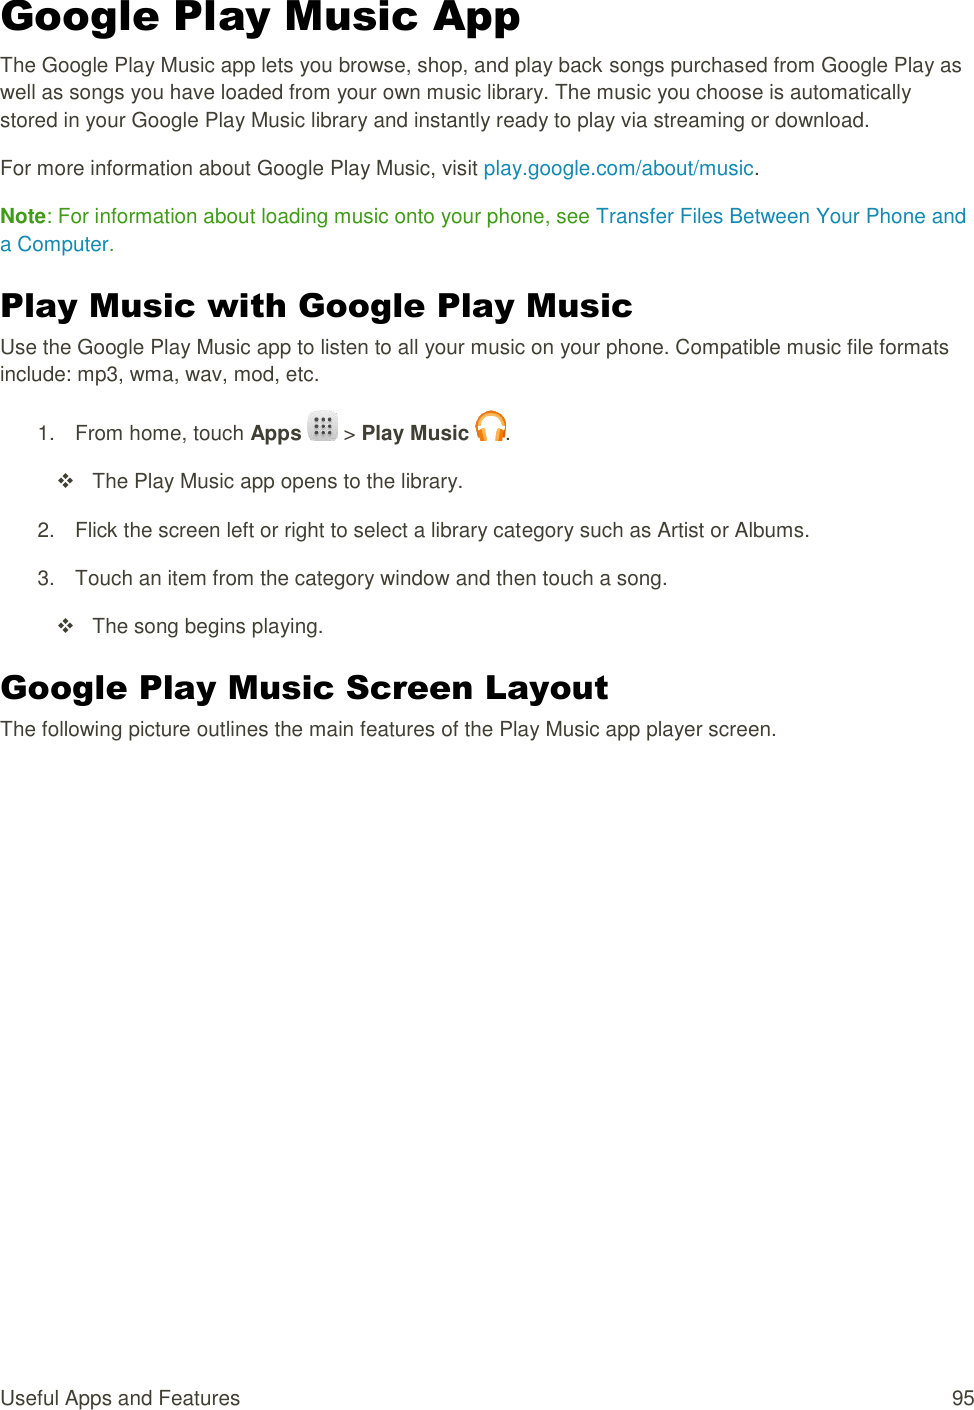 Useful Apps and Features  95 Google Play Music App The Google Play Music app lets you browse, shop, and play back songs purchased from Google Play as well as songs you have loaded from your own music library. The music you choose is automatically stored in your Google Play Music library and instantly ready to play via streaming or download. For more information about Google Play Music, visit play.google.com/about/music. Note: For information about loading music onto your phone, see Transfer Files Between Your Phone and a Computer. Play Music with Google Play Music Use the Google Play Music app to listen to all your music on your phone. Compatible music file formats include: mp3, wma, wav, mod, etc. 1.  From home, touch Apps   &gt; Play Music  .     The Play Music app opens to the library. 2.  Flick the screen left or right to select a library category such as Artist or Albums. 3.  Touch an item from the category window and then touch a song.     The song begins playing. Google Play Music Screen Layout The following picture outlines the main features of the Play Music app player screen. 